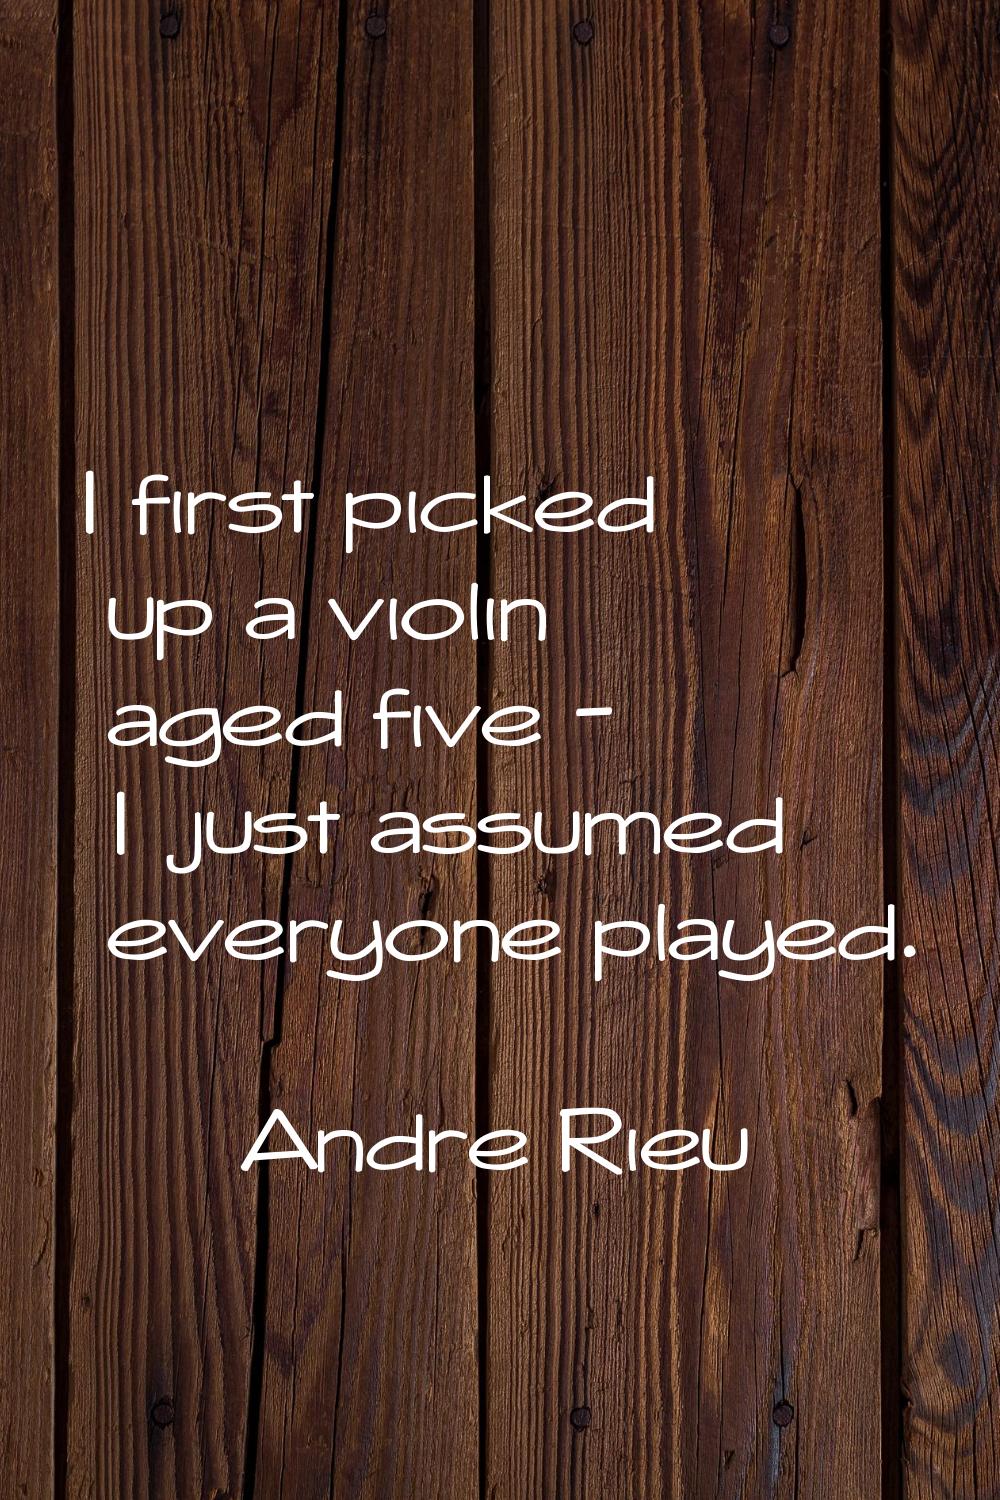 I first picked up a violin aged five - I just assumed everyone played.